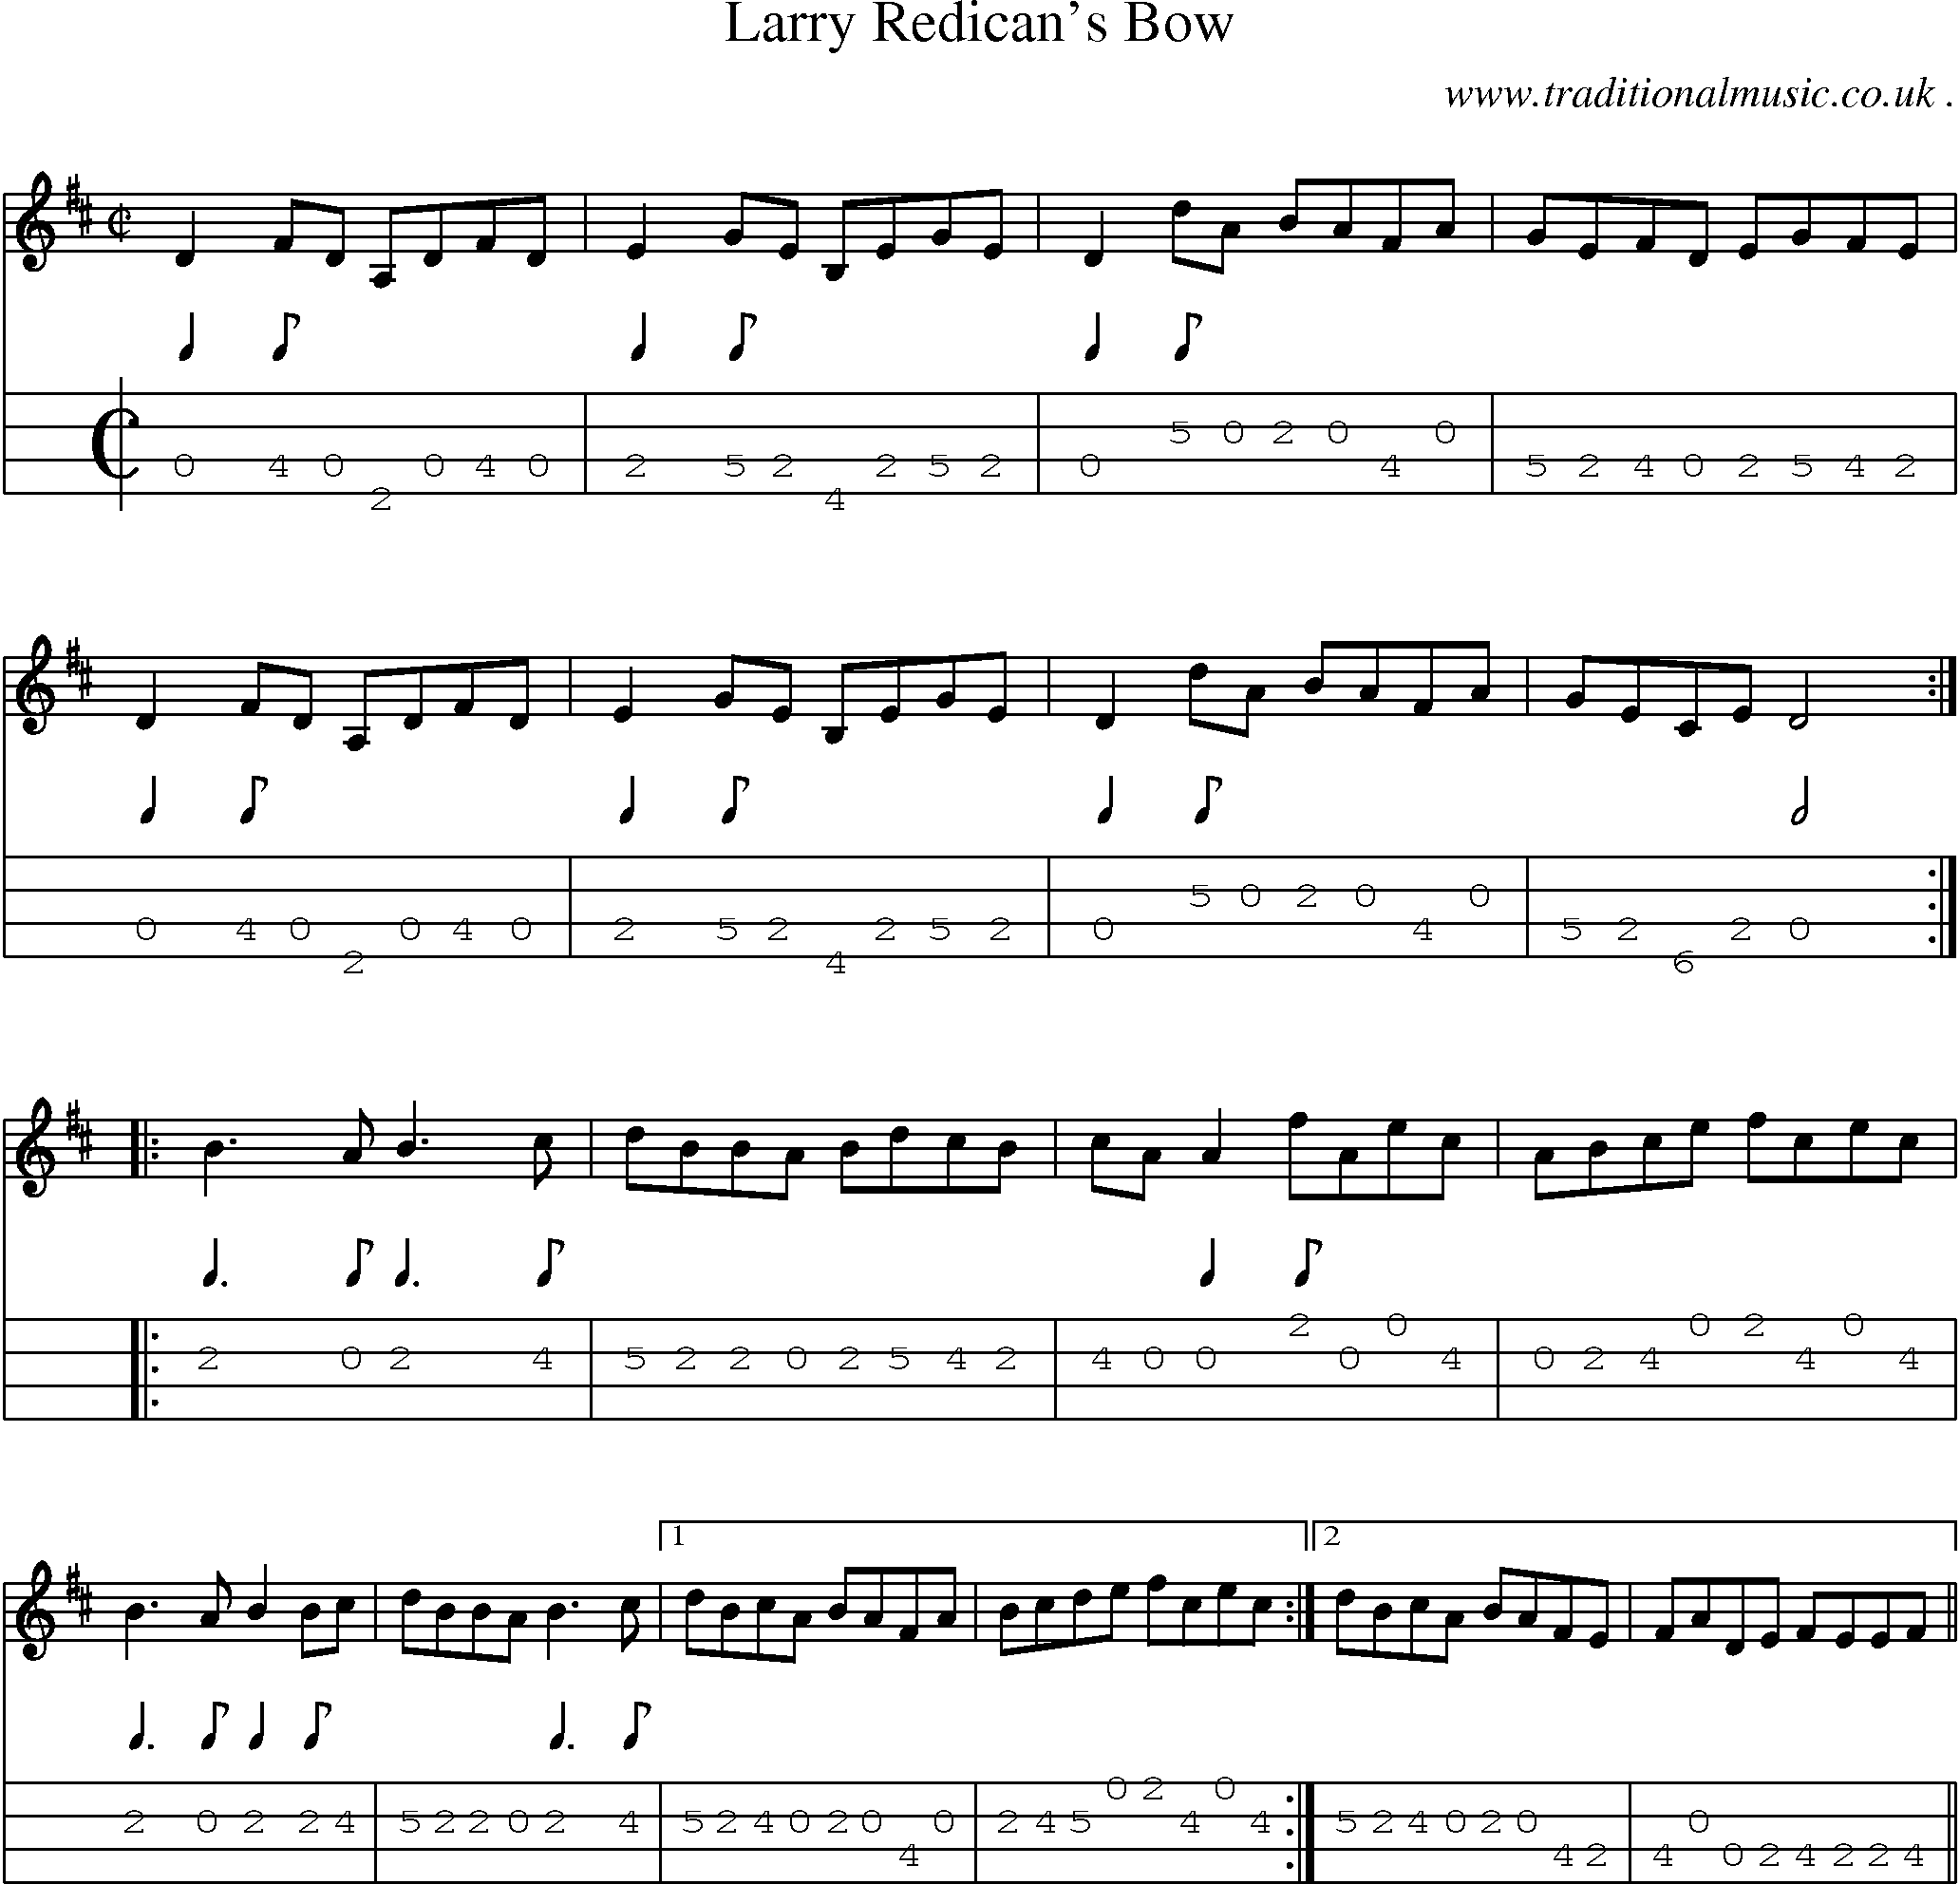 Sheet-Music and Mandolin Tabs for Larry Redicans Bow